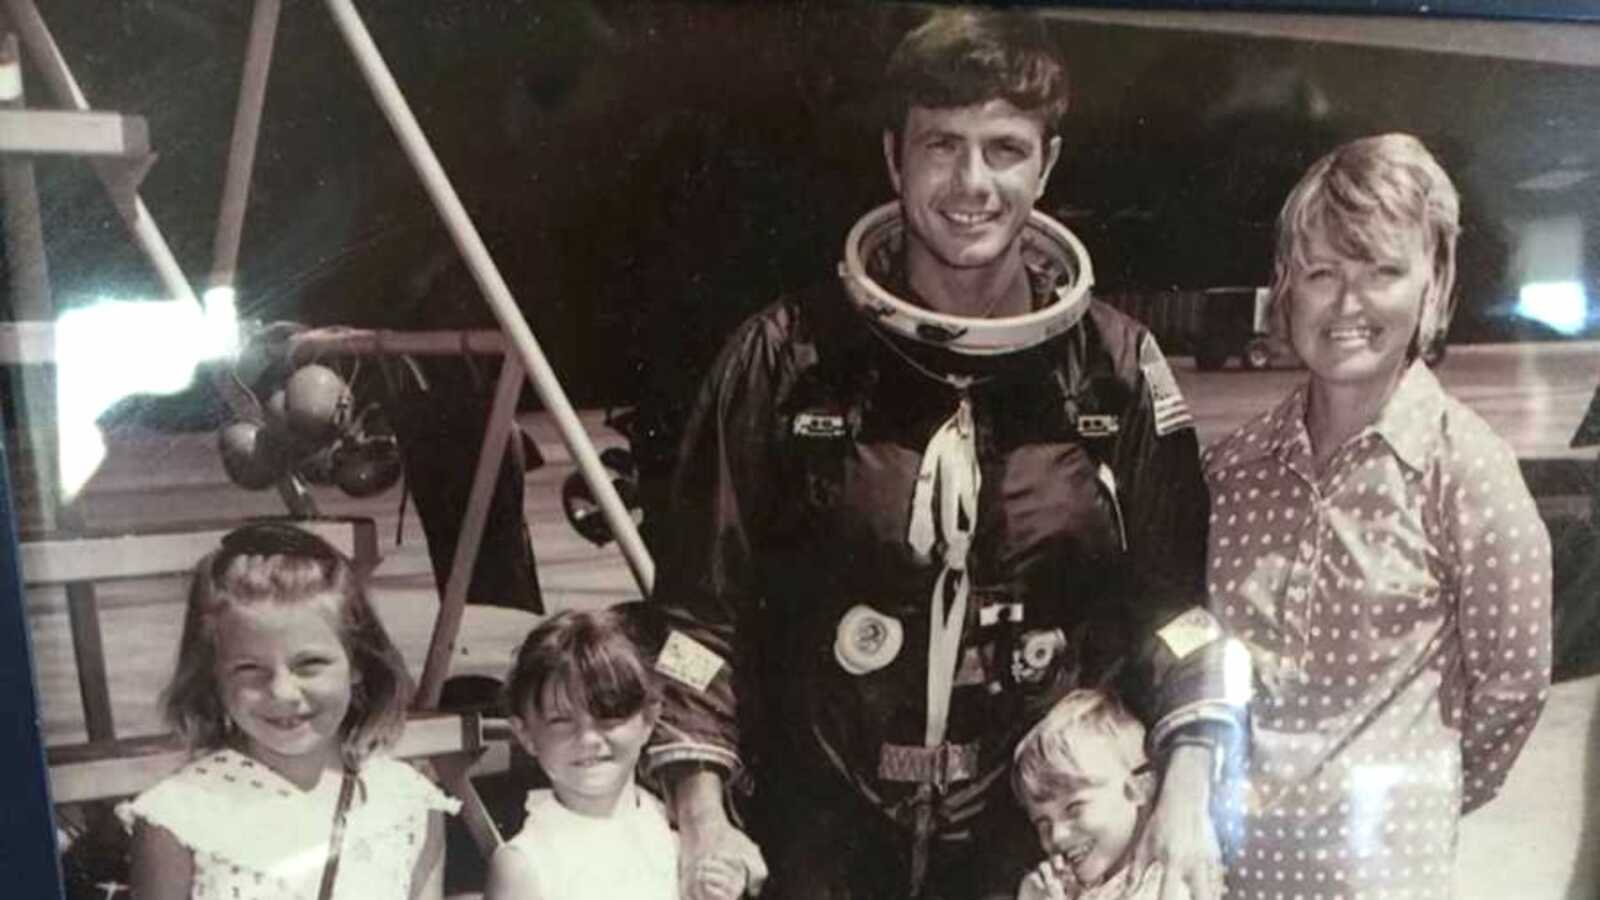 Vintage photo of dad in spacesuit next to wife and three kids